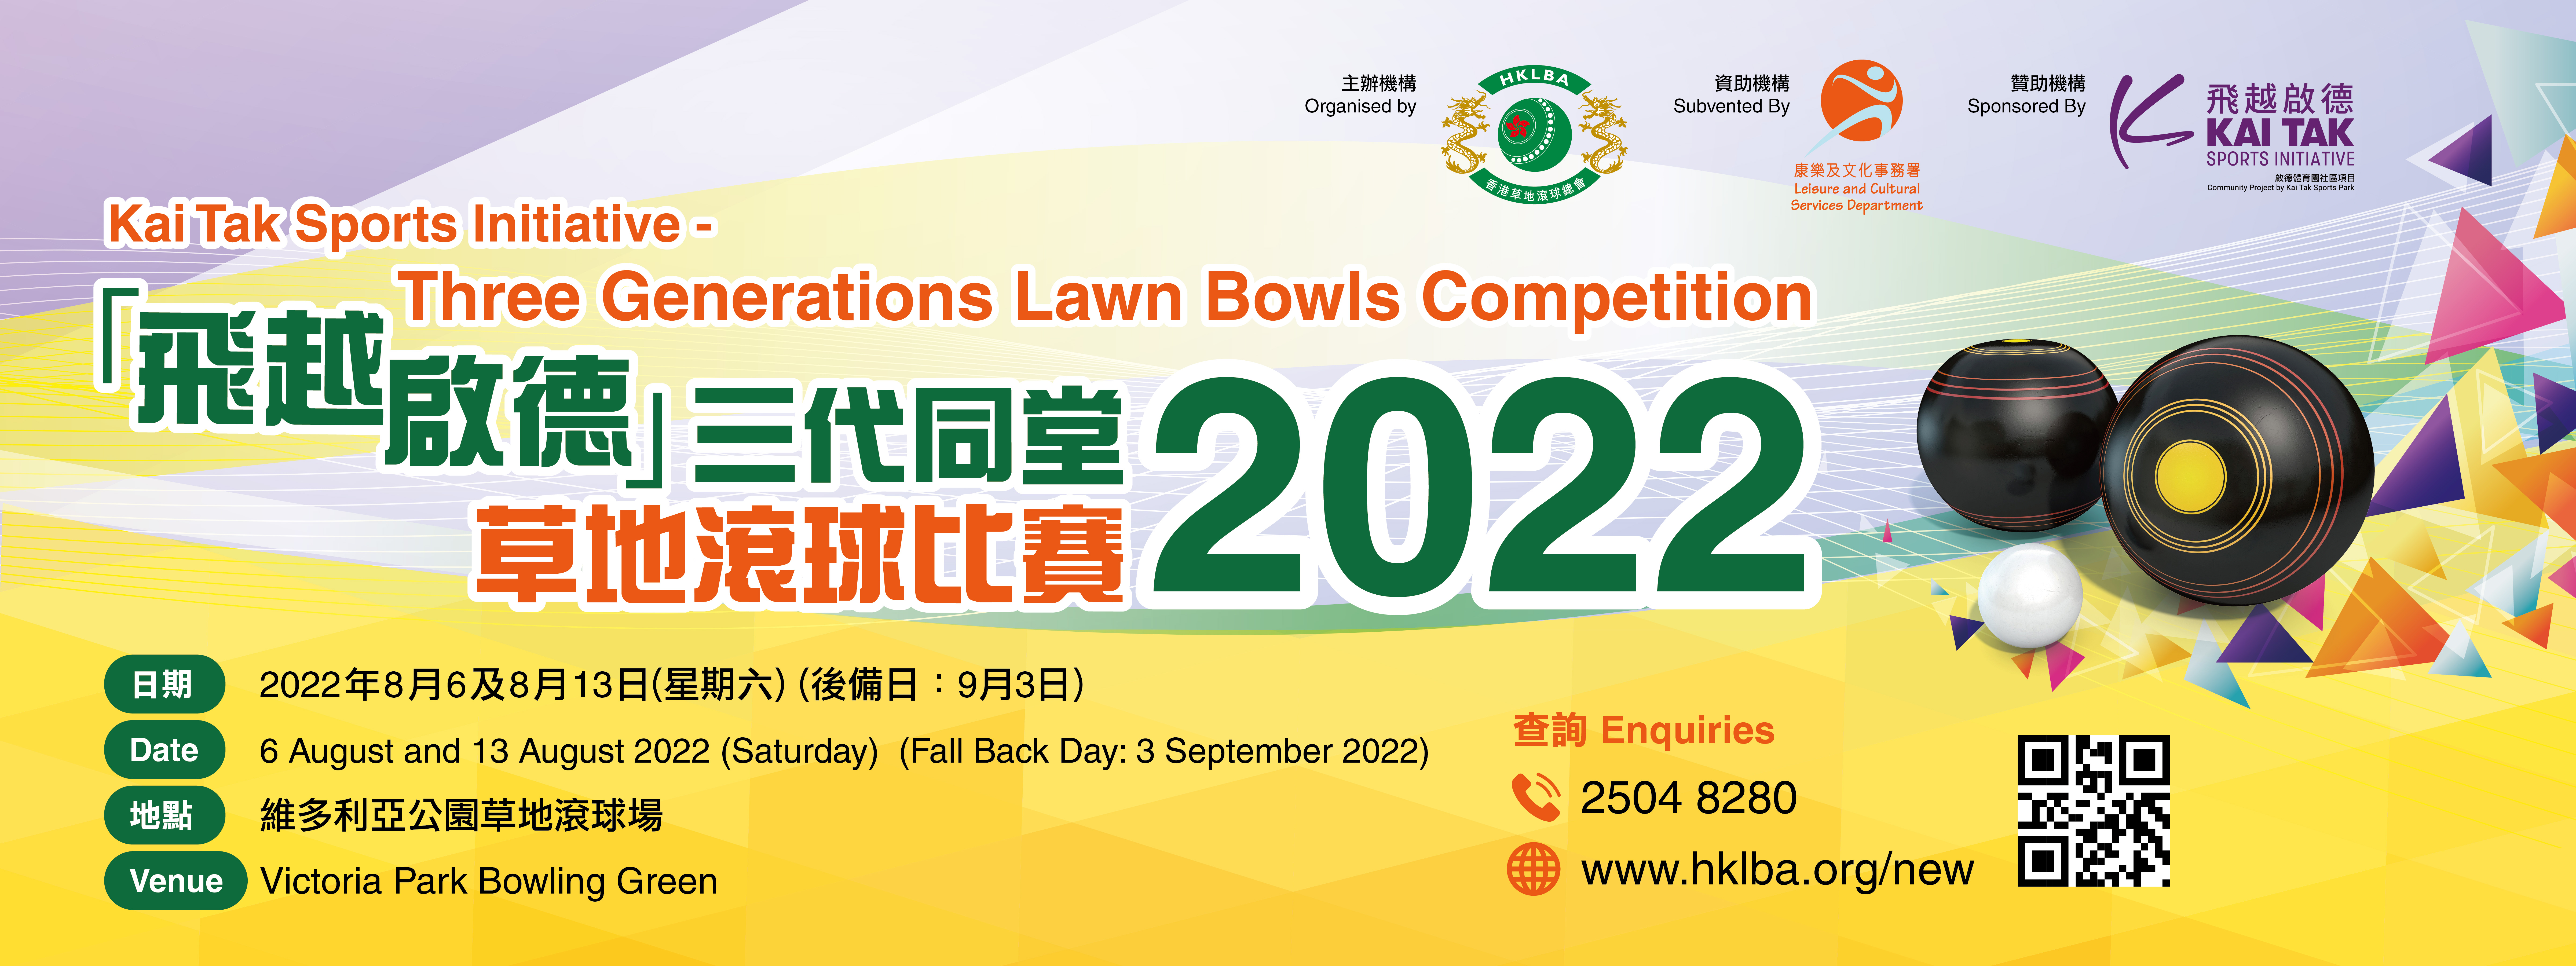 [Day 1 result & updated fixture] KTSI Three Generations Lawn Bowls Competition 2022